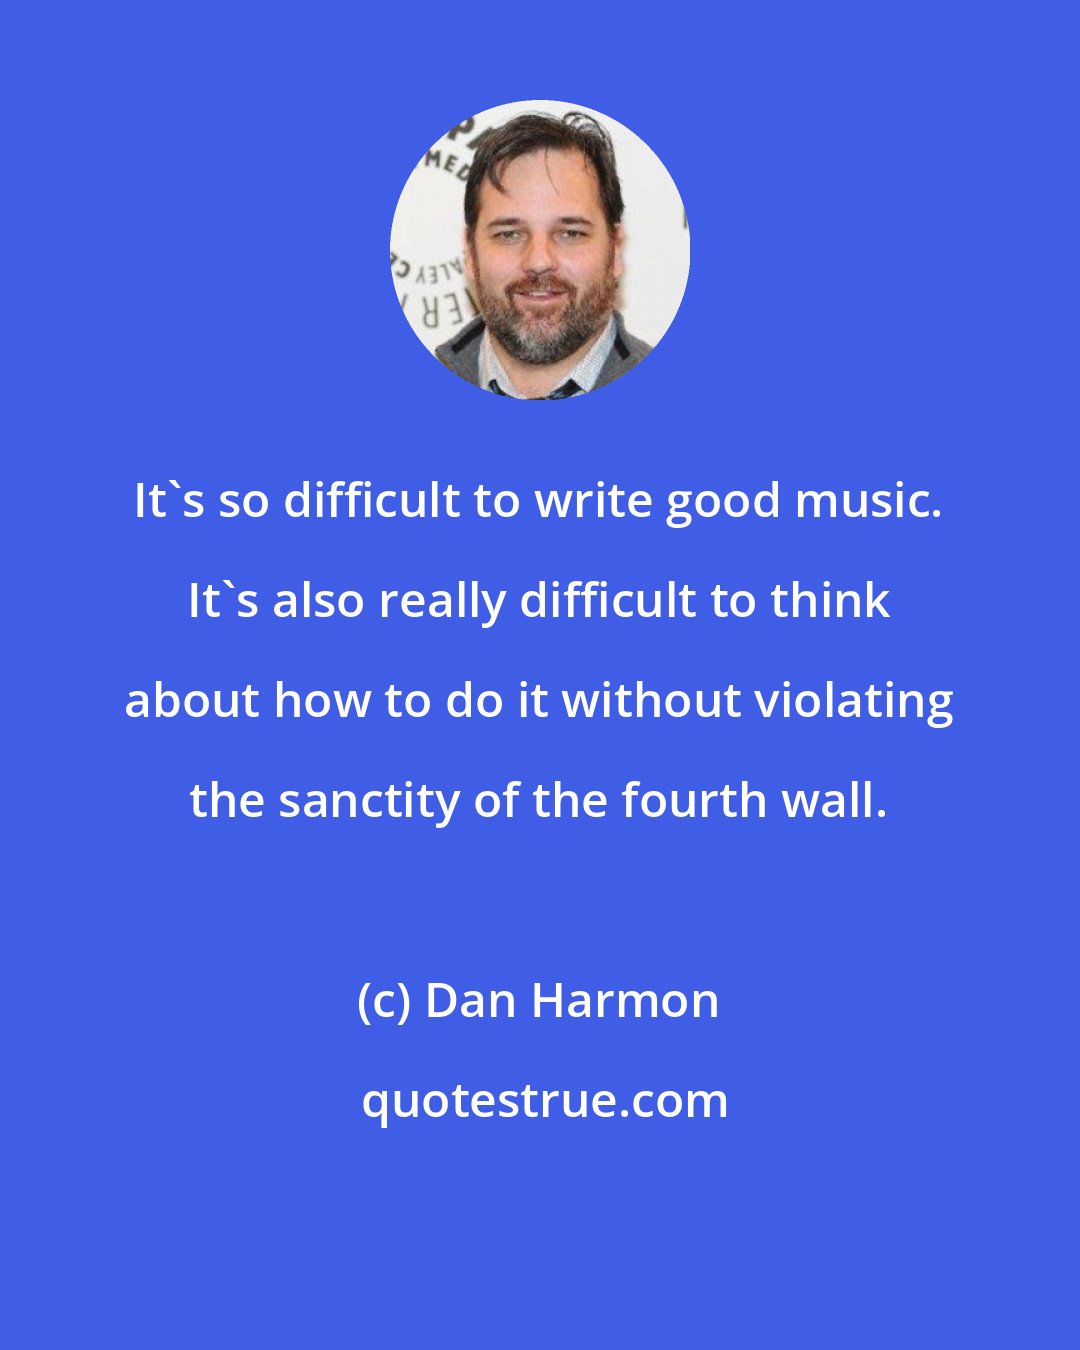 Dan Harmon: It's so difficult to write good music. It's also really difficult to think about how to do it without violating the sanctity of the fourth wall.